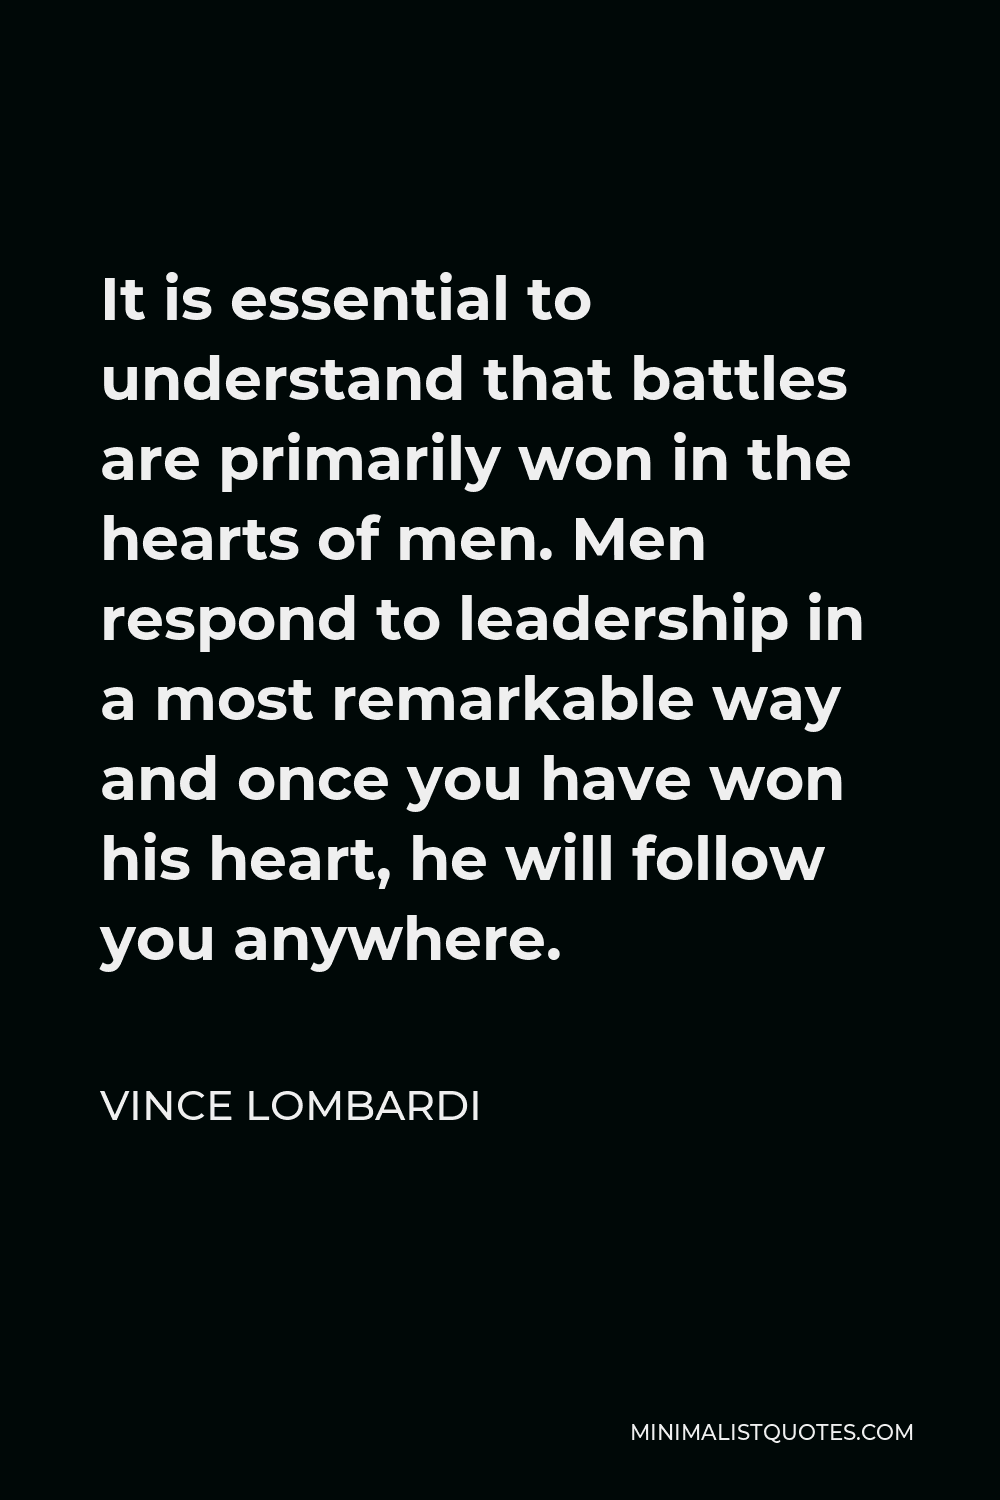 Vince Lombardi Quote - It is essential to understand that battles are primarily won in the hearts of men. Men respond to leadership in a most remarkable way and once you have won his heart, he will follow you anywhere.